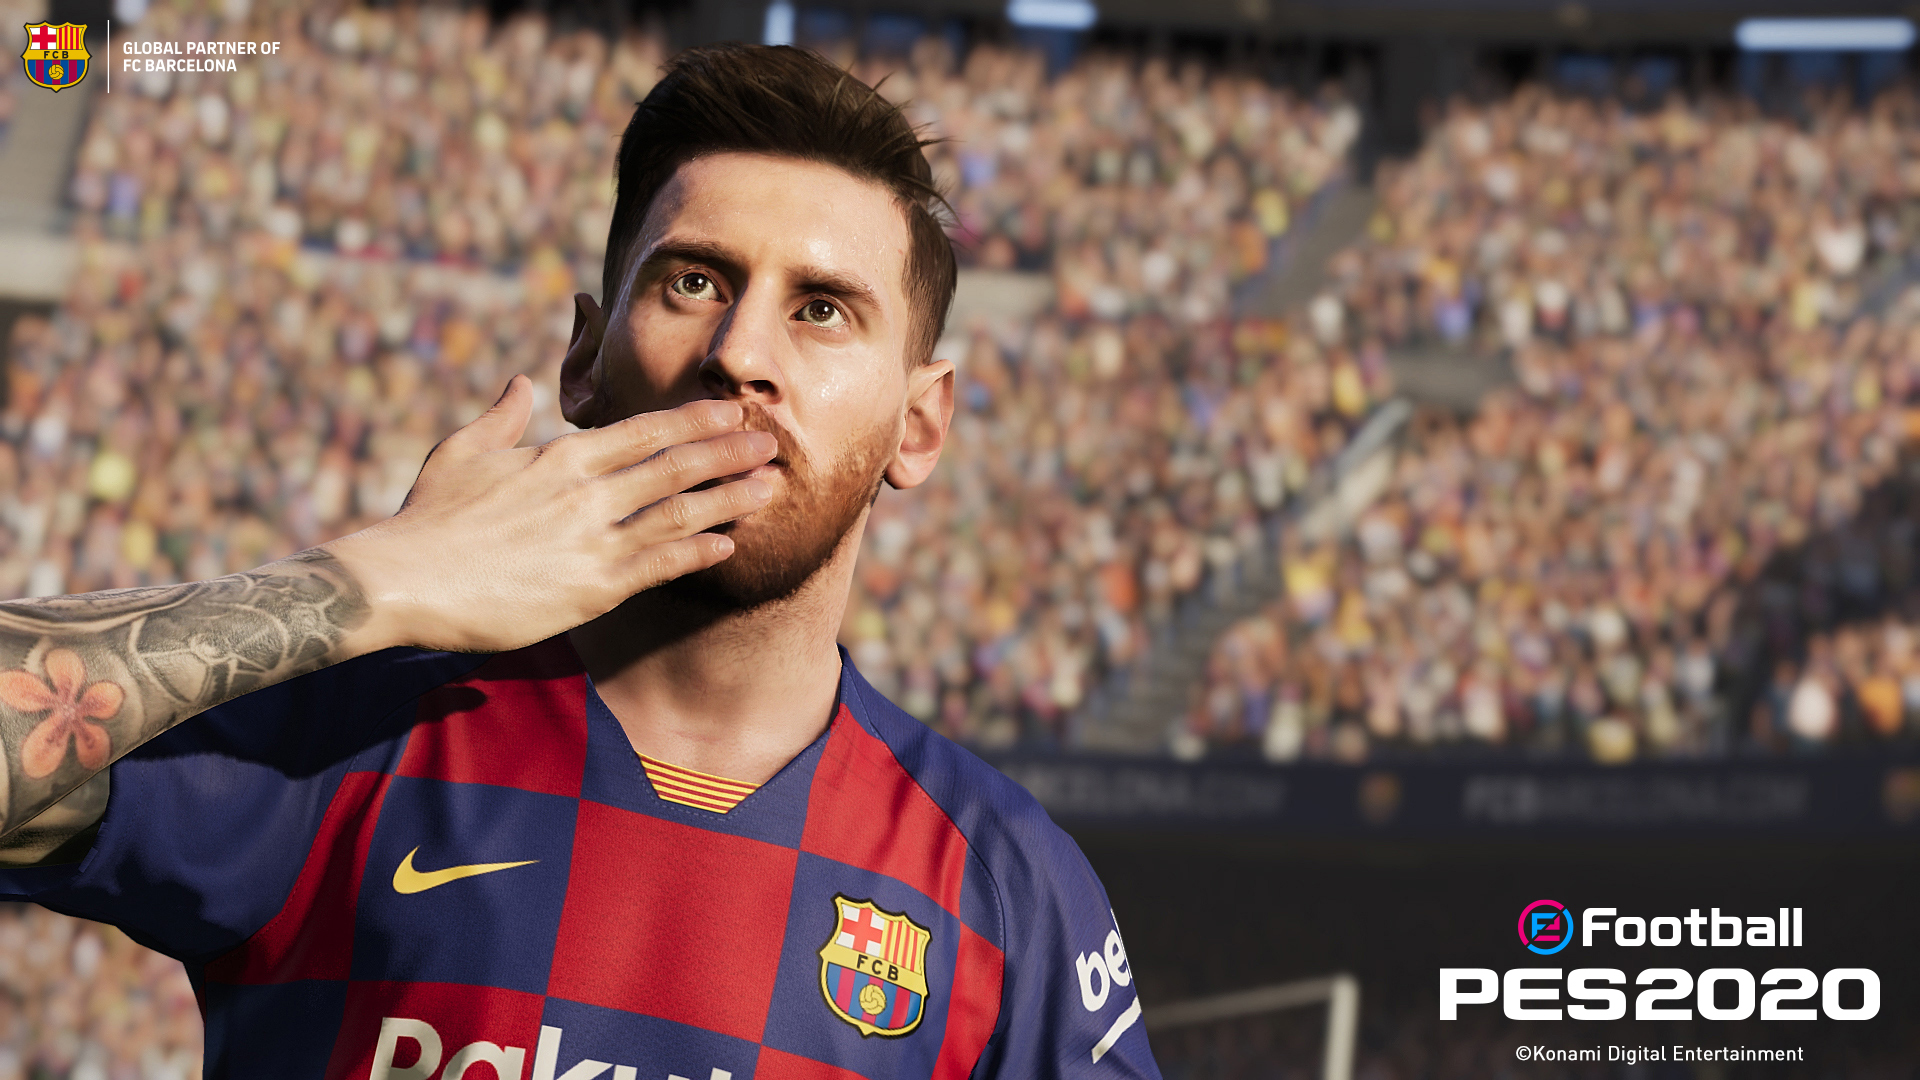 pes 2020 acquires license rights to EURO 2020